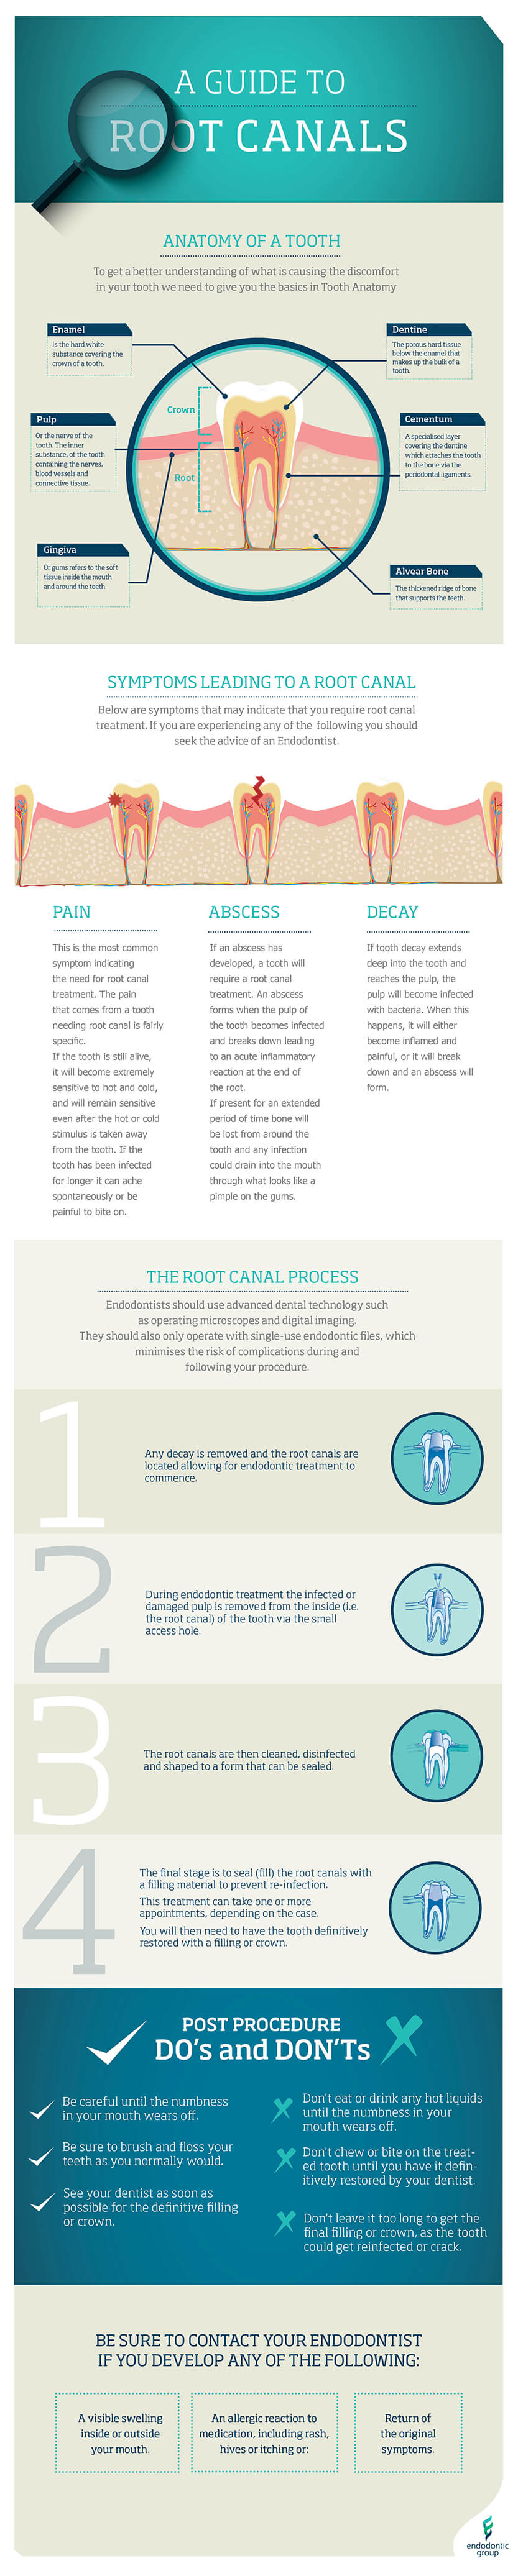 A Guide to Root Canals